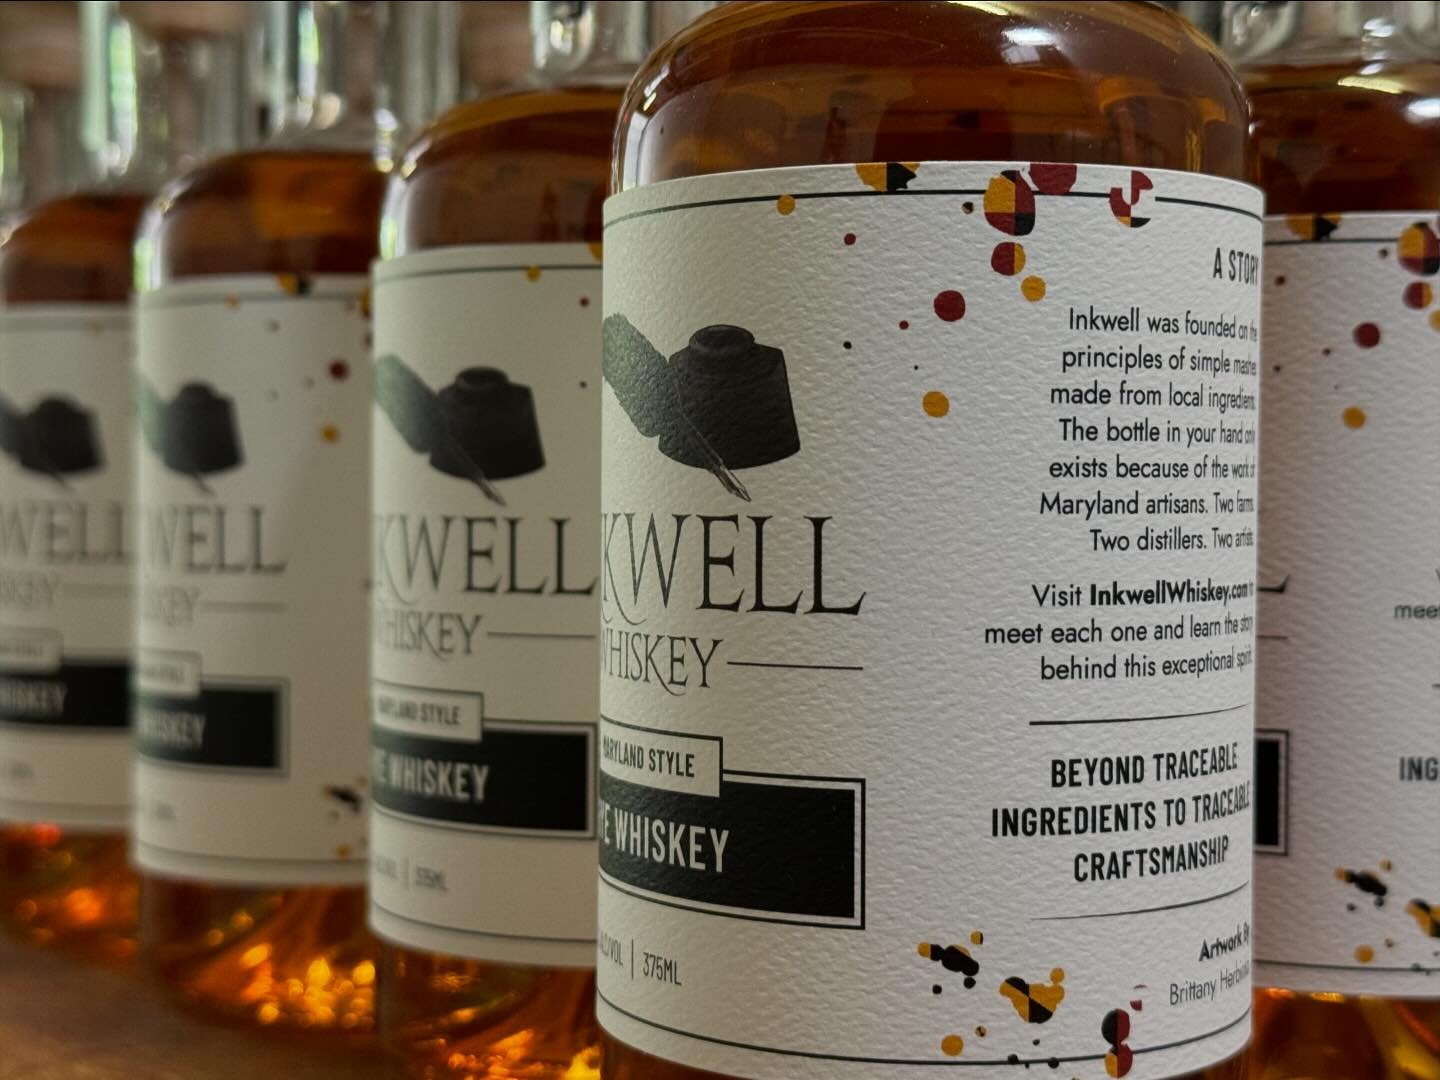 The newest style of Inkwell is coming&hellip;
Get ready for our invitingly sweet, beguilingly spicy Maryland Rye. Made with four kinds of grains, it&rsquo;s bound to be defy and exceed your expectations. 
We&rsquo;re launching this new spirit at @shm